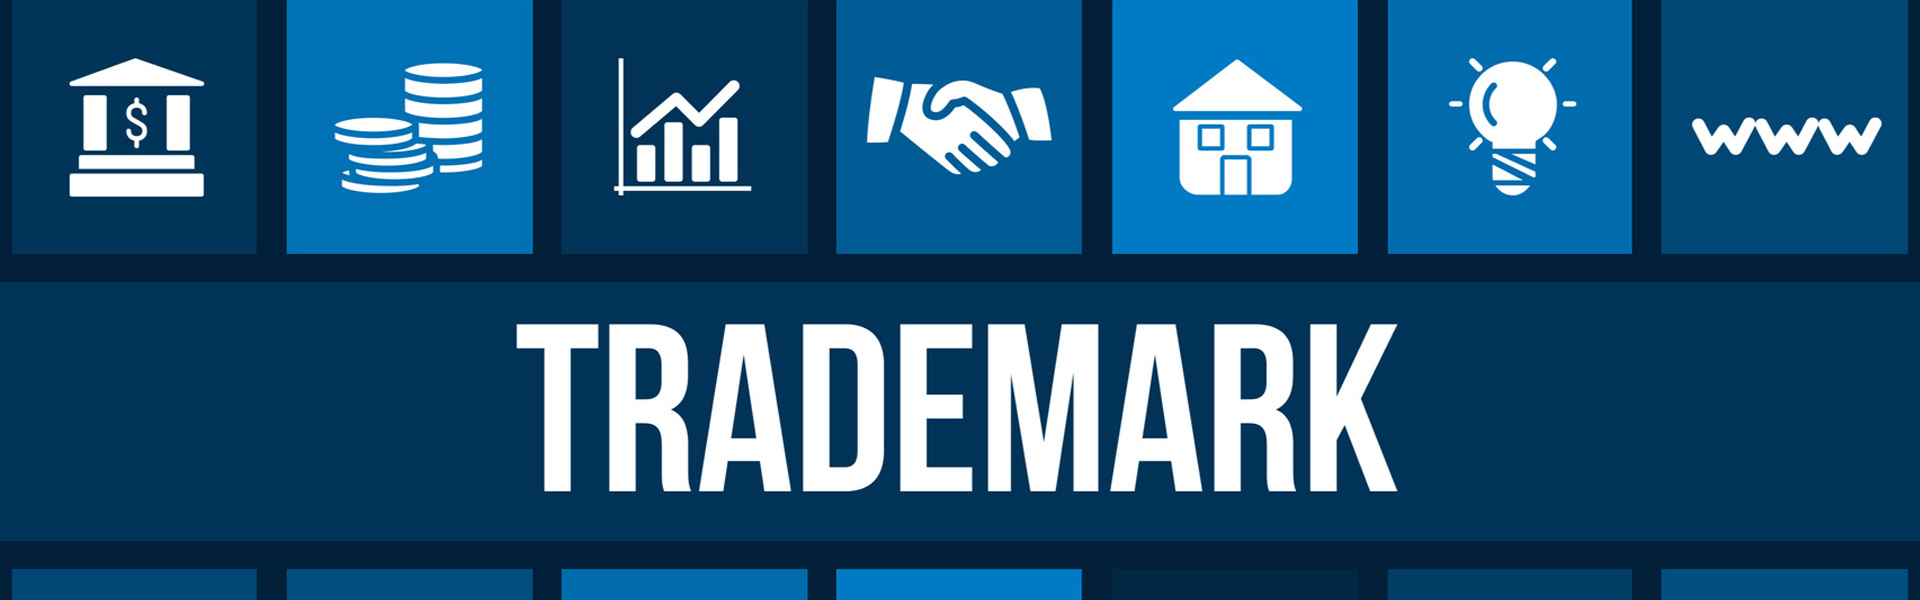 how to check registered trademarks